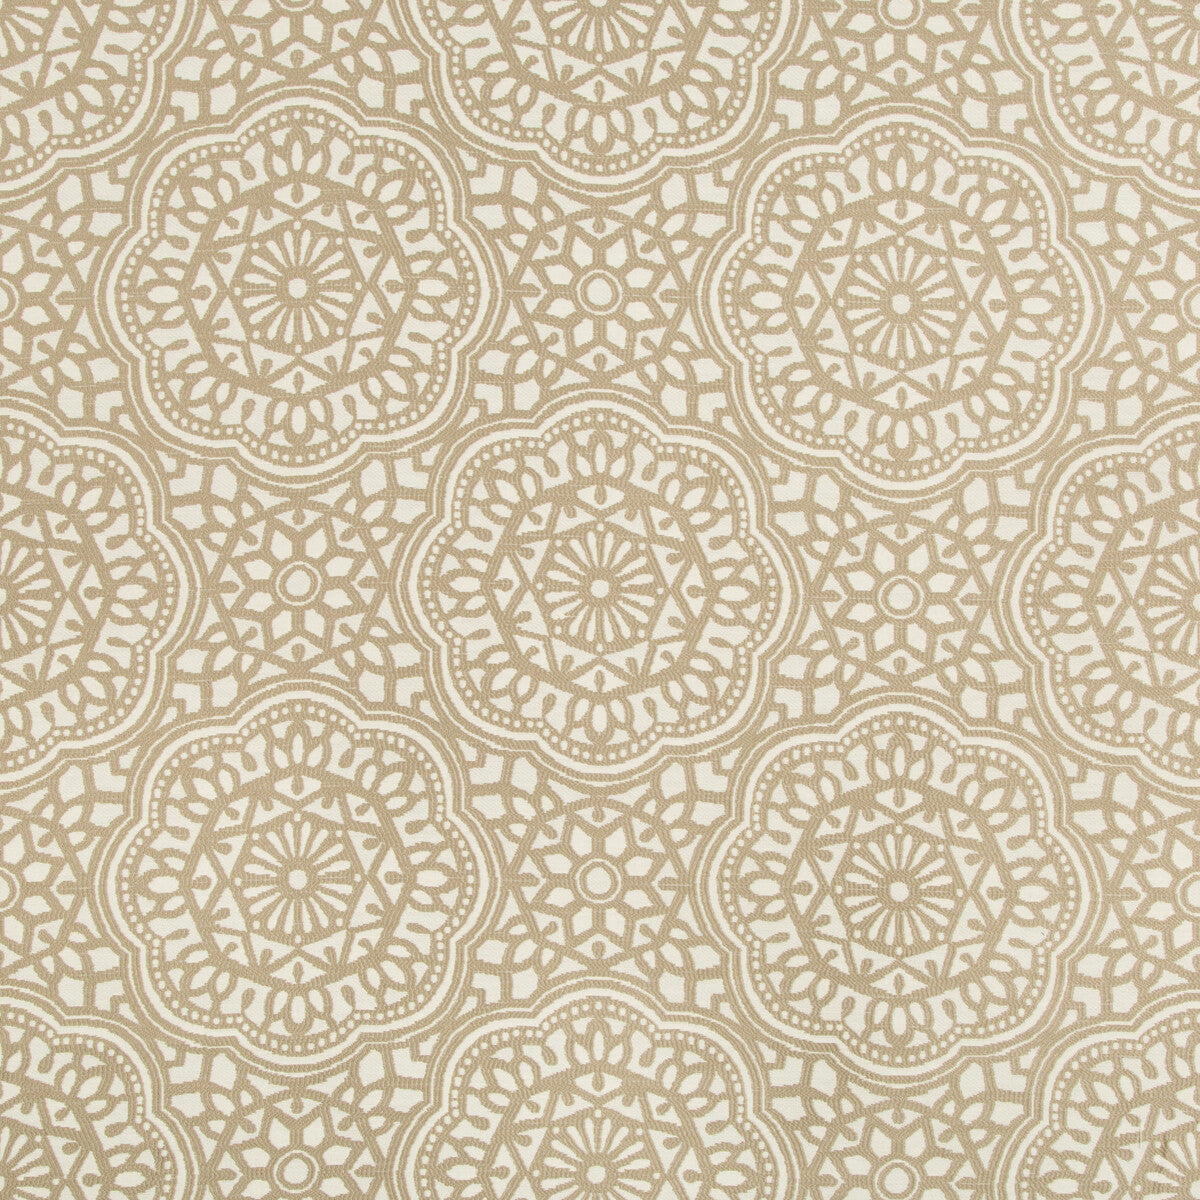 Kravet Contract fabric in 35172-106 color - pattern 35172.106.0 - by Kravet Contract in the Incase Crypton Gis collection